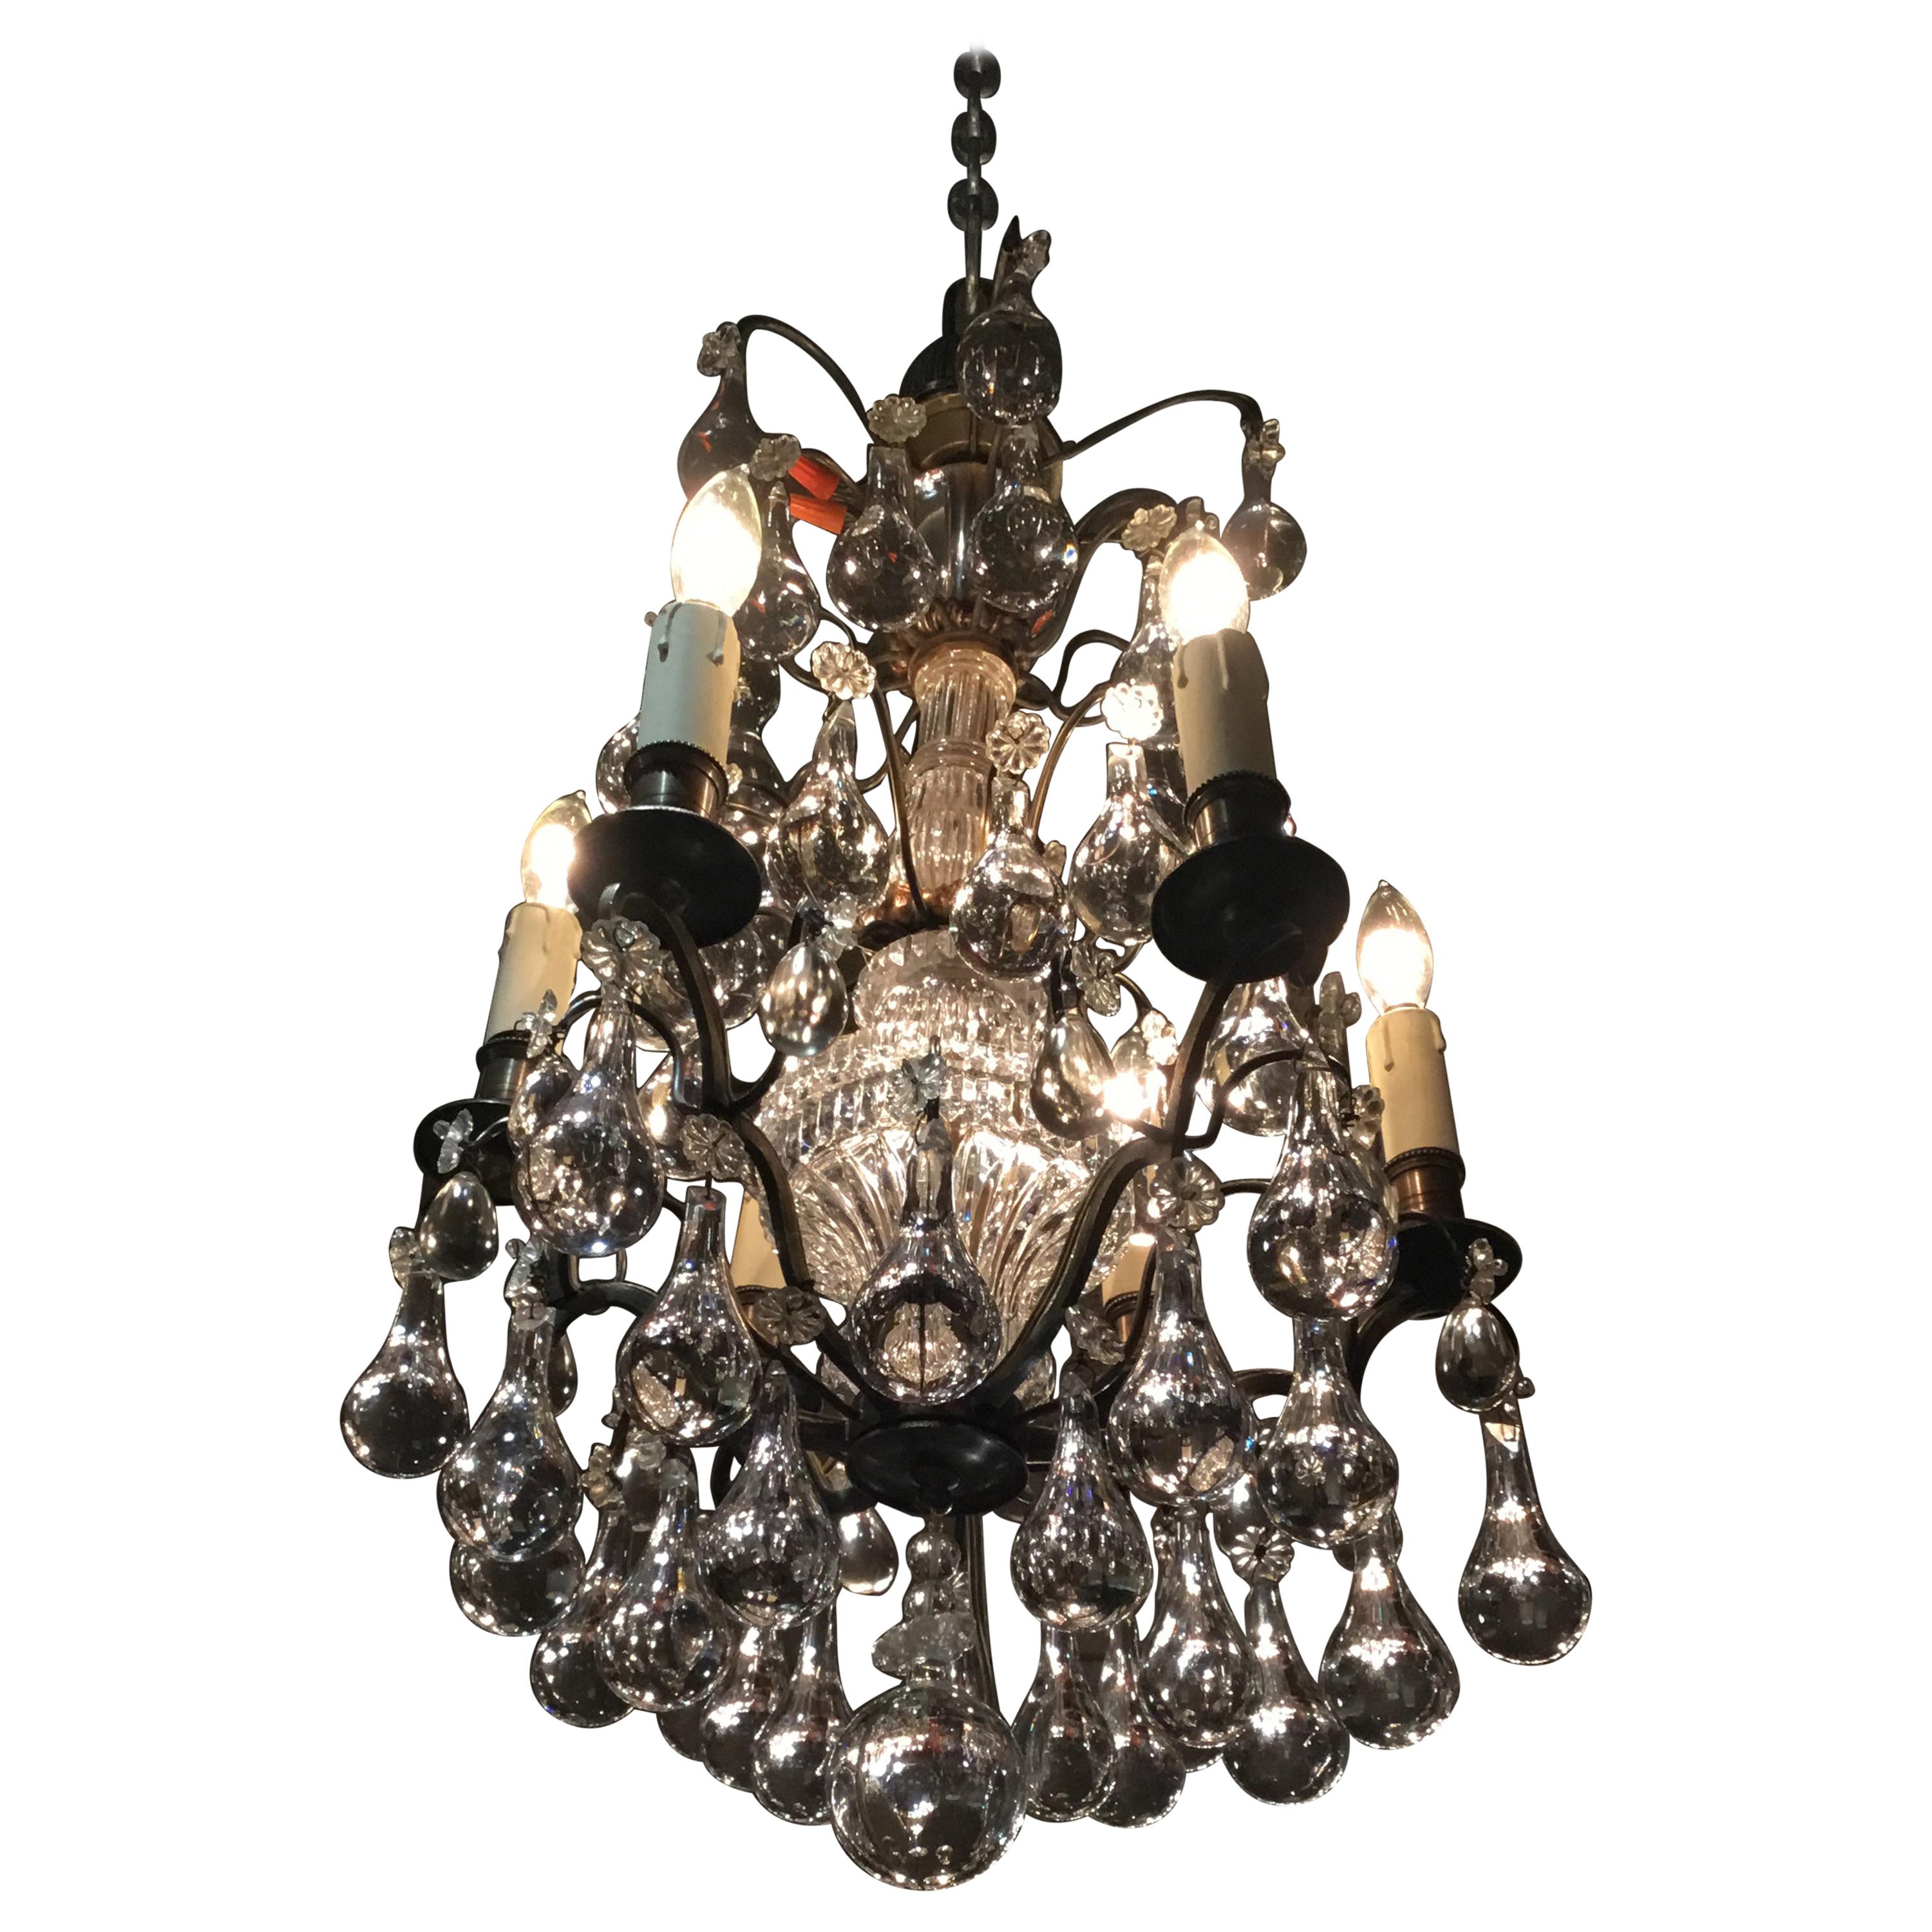 Six Light Antique Bronze and Crystal Chandelier with Six Lights